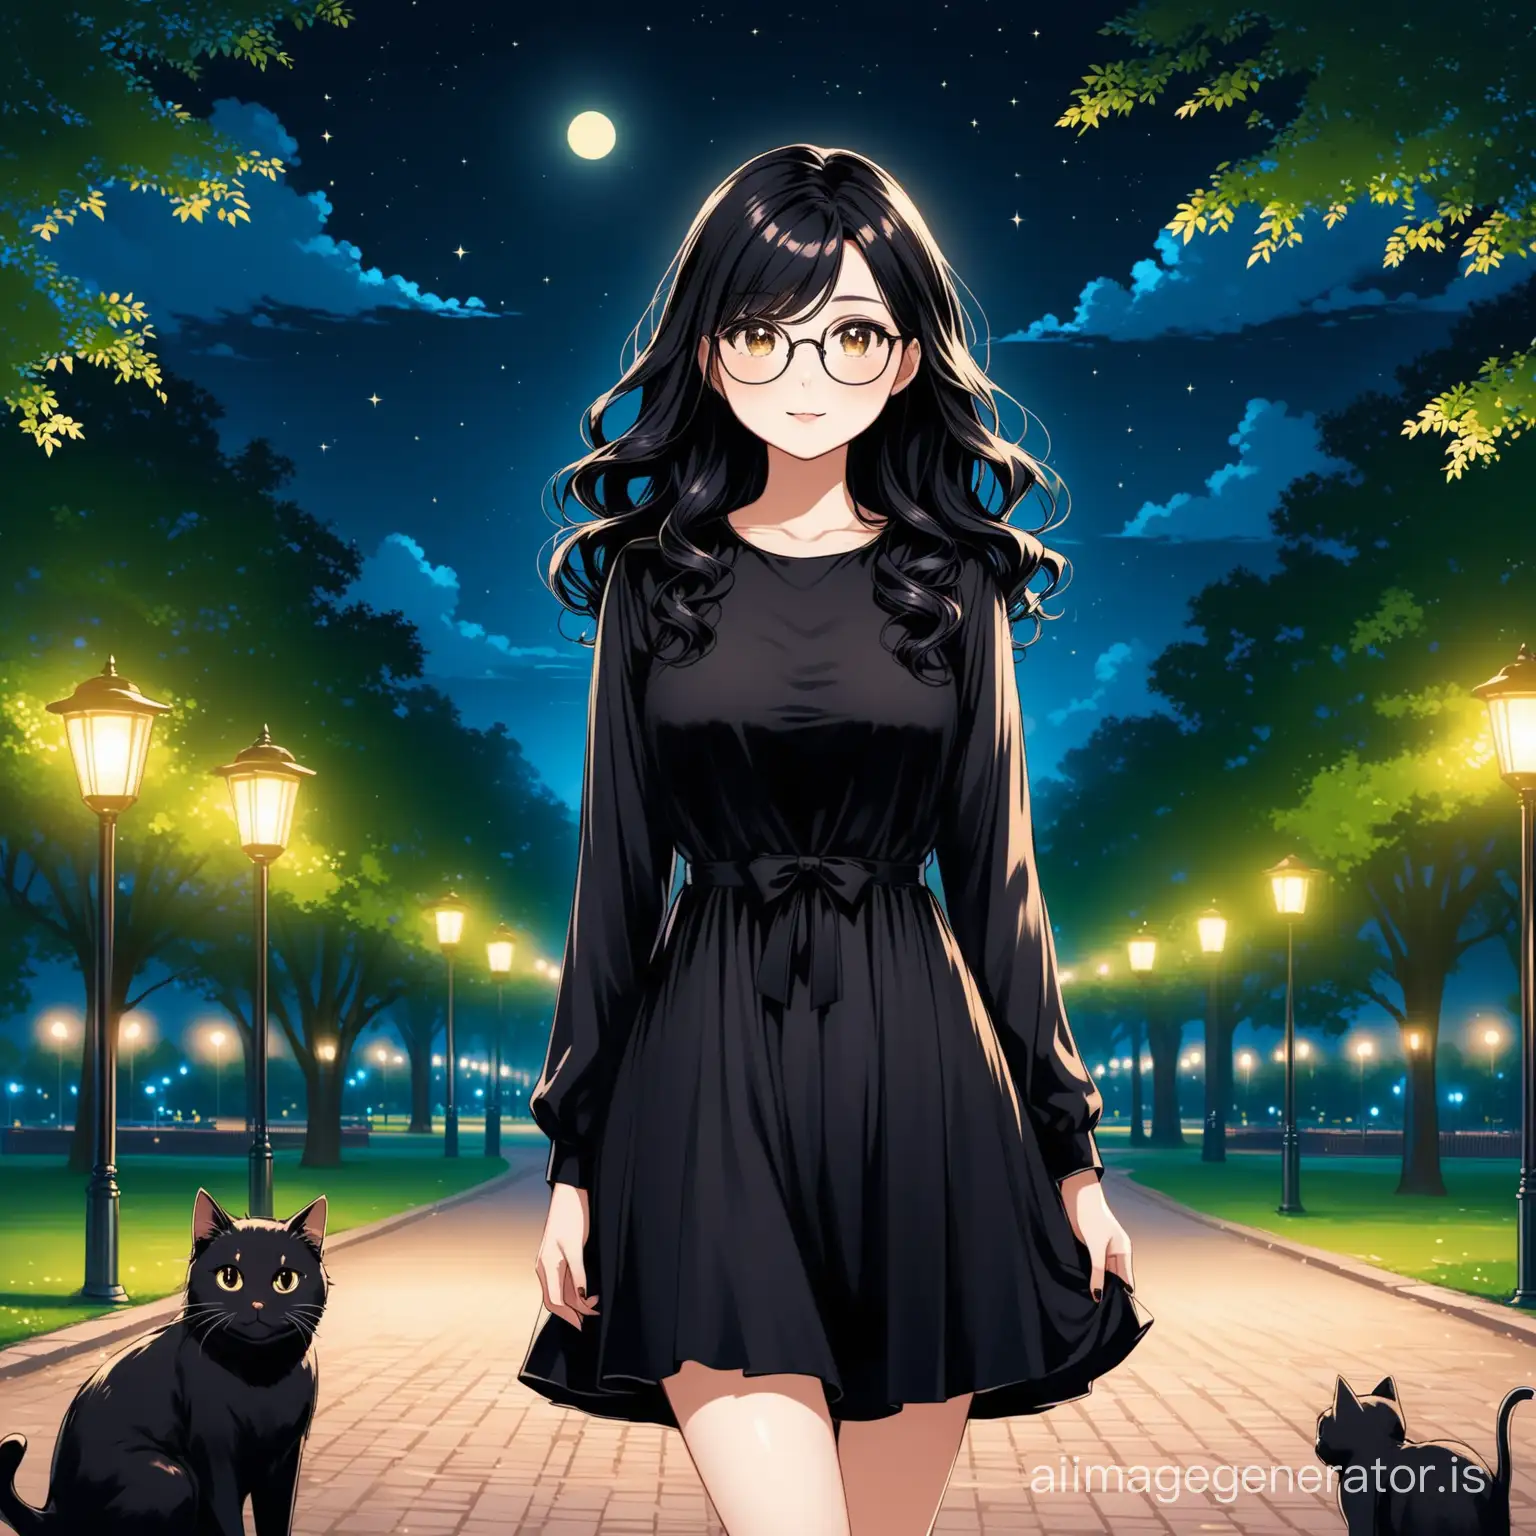 Girl with black hair and black dress and glasses with wave hair in night park and cat